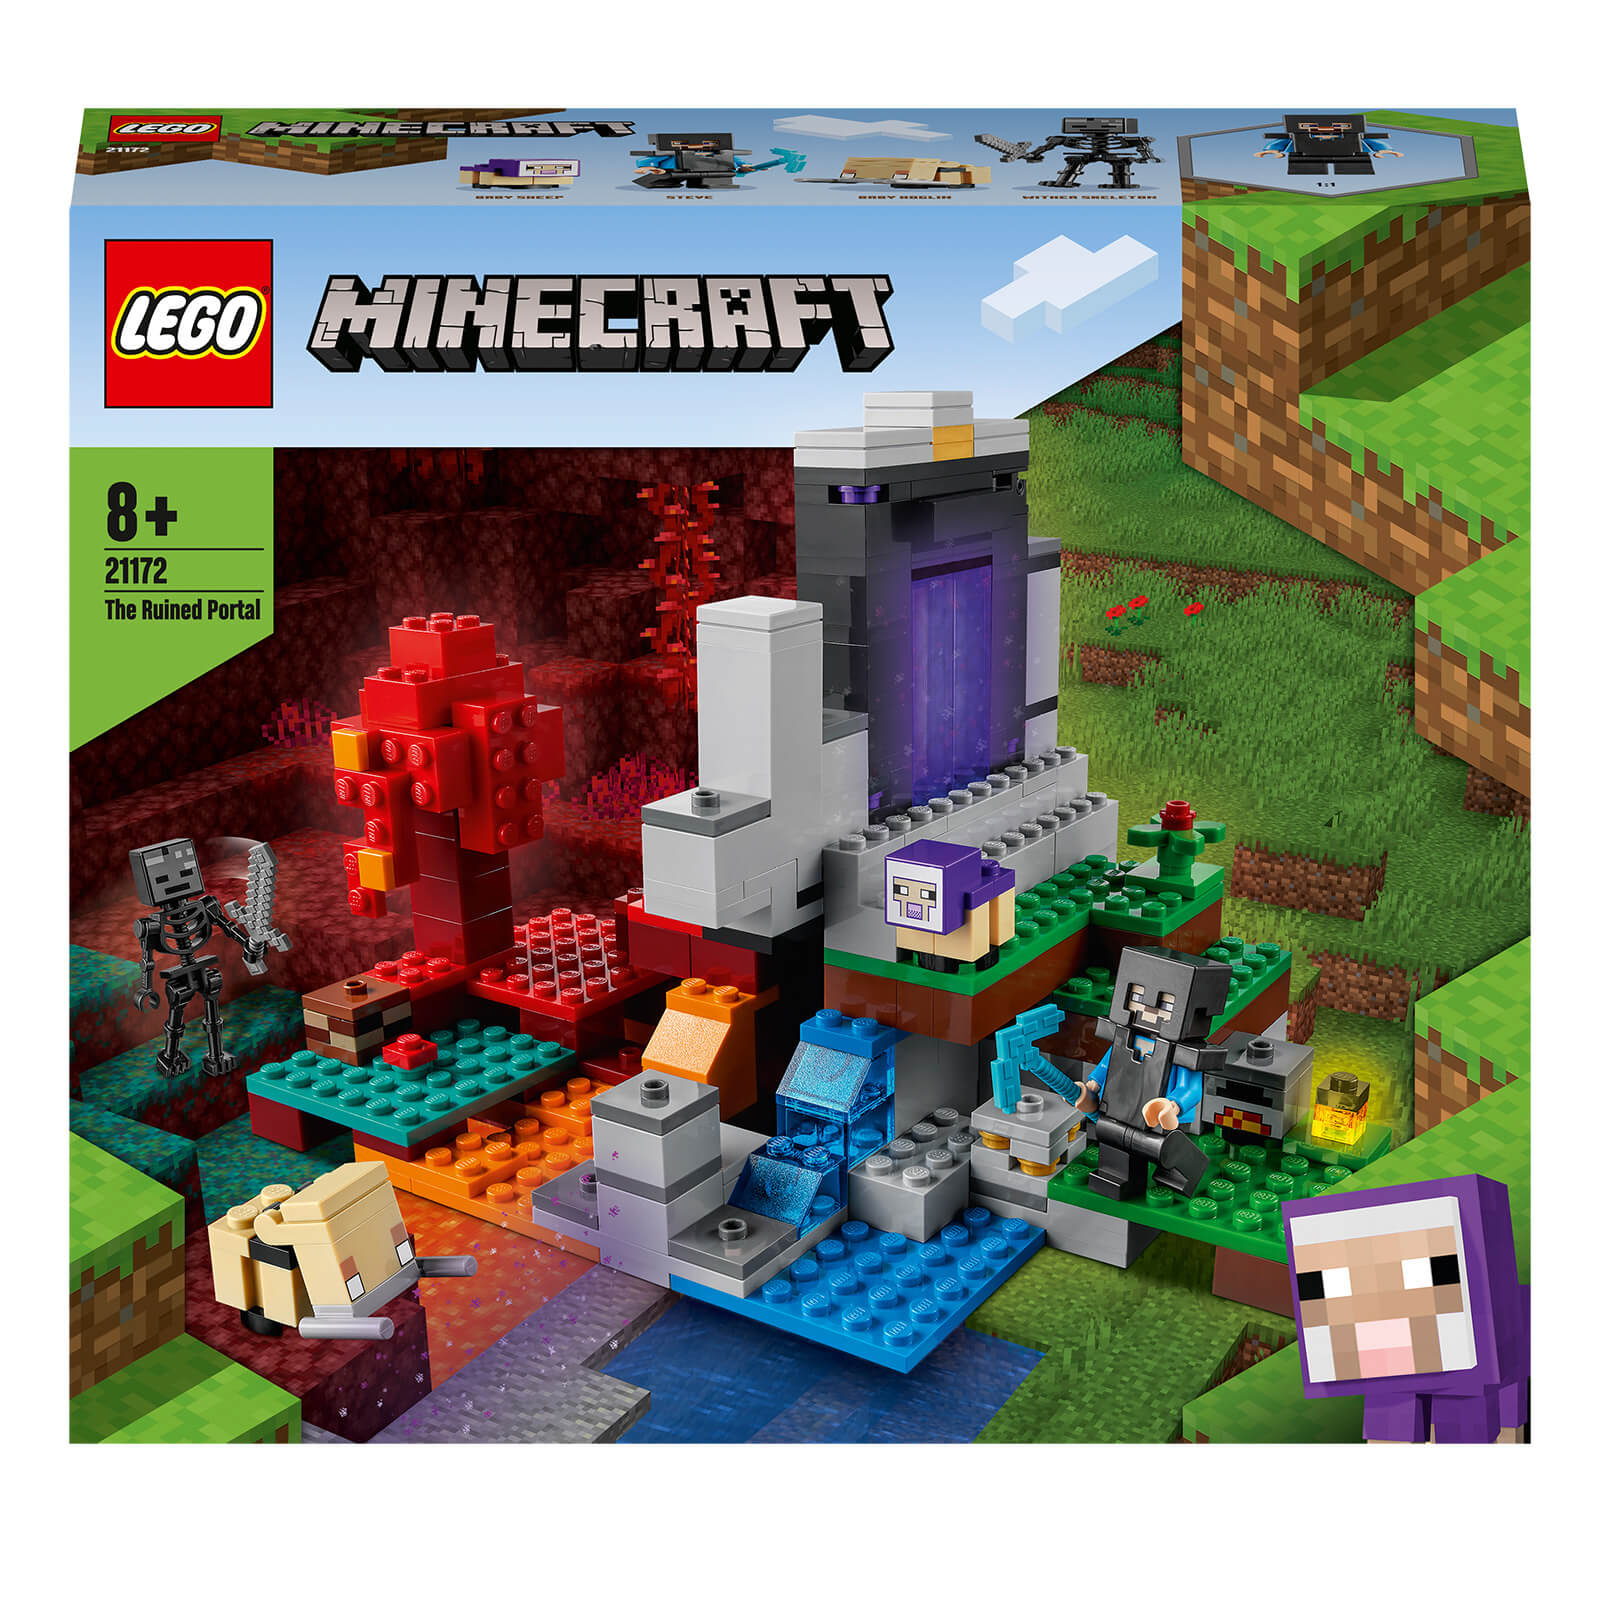 LEGO Minecraft The Ruined Portal Construction Toy (21172)